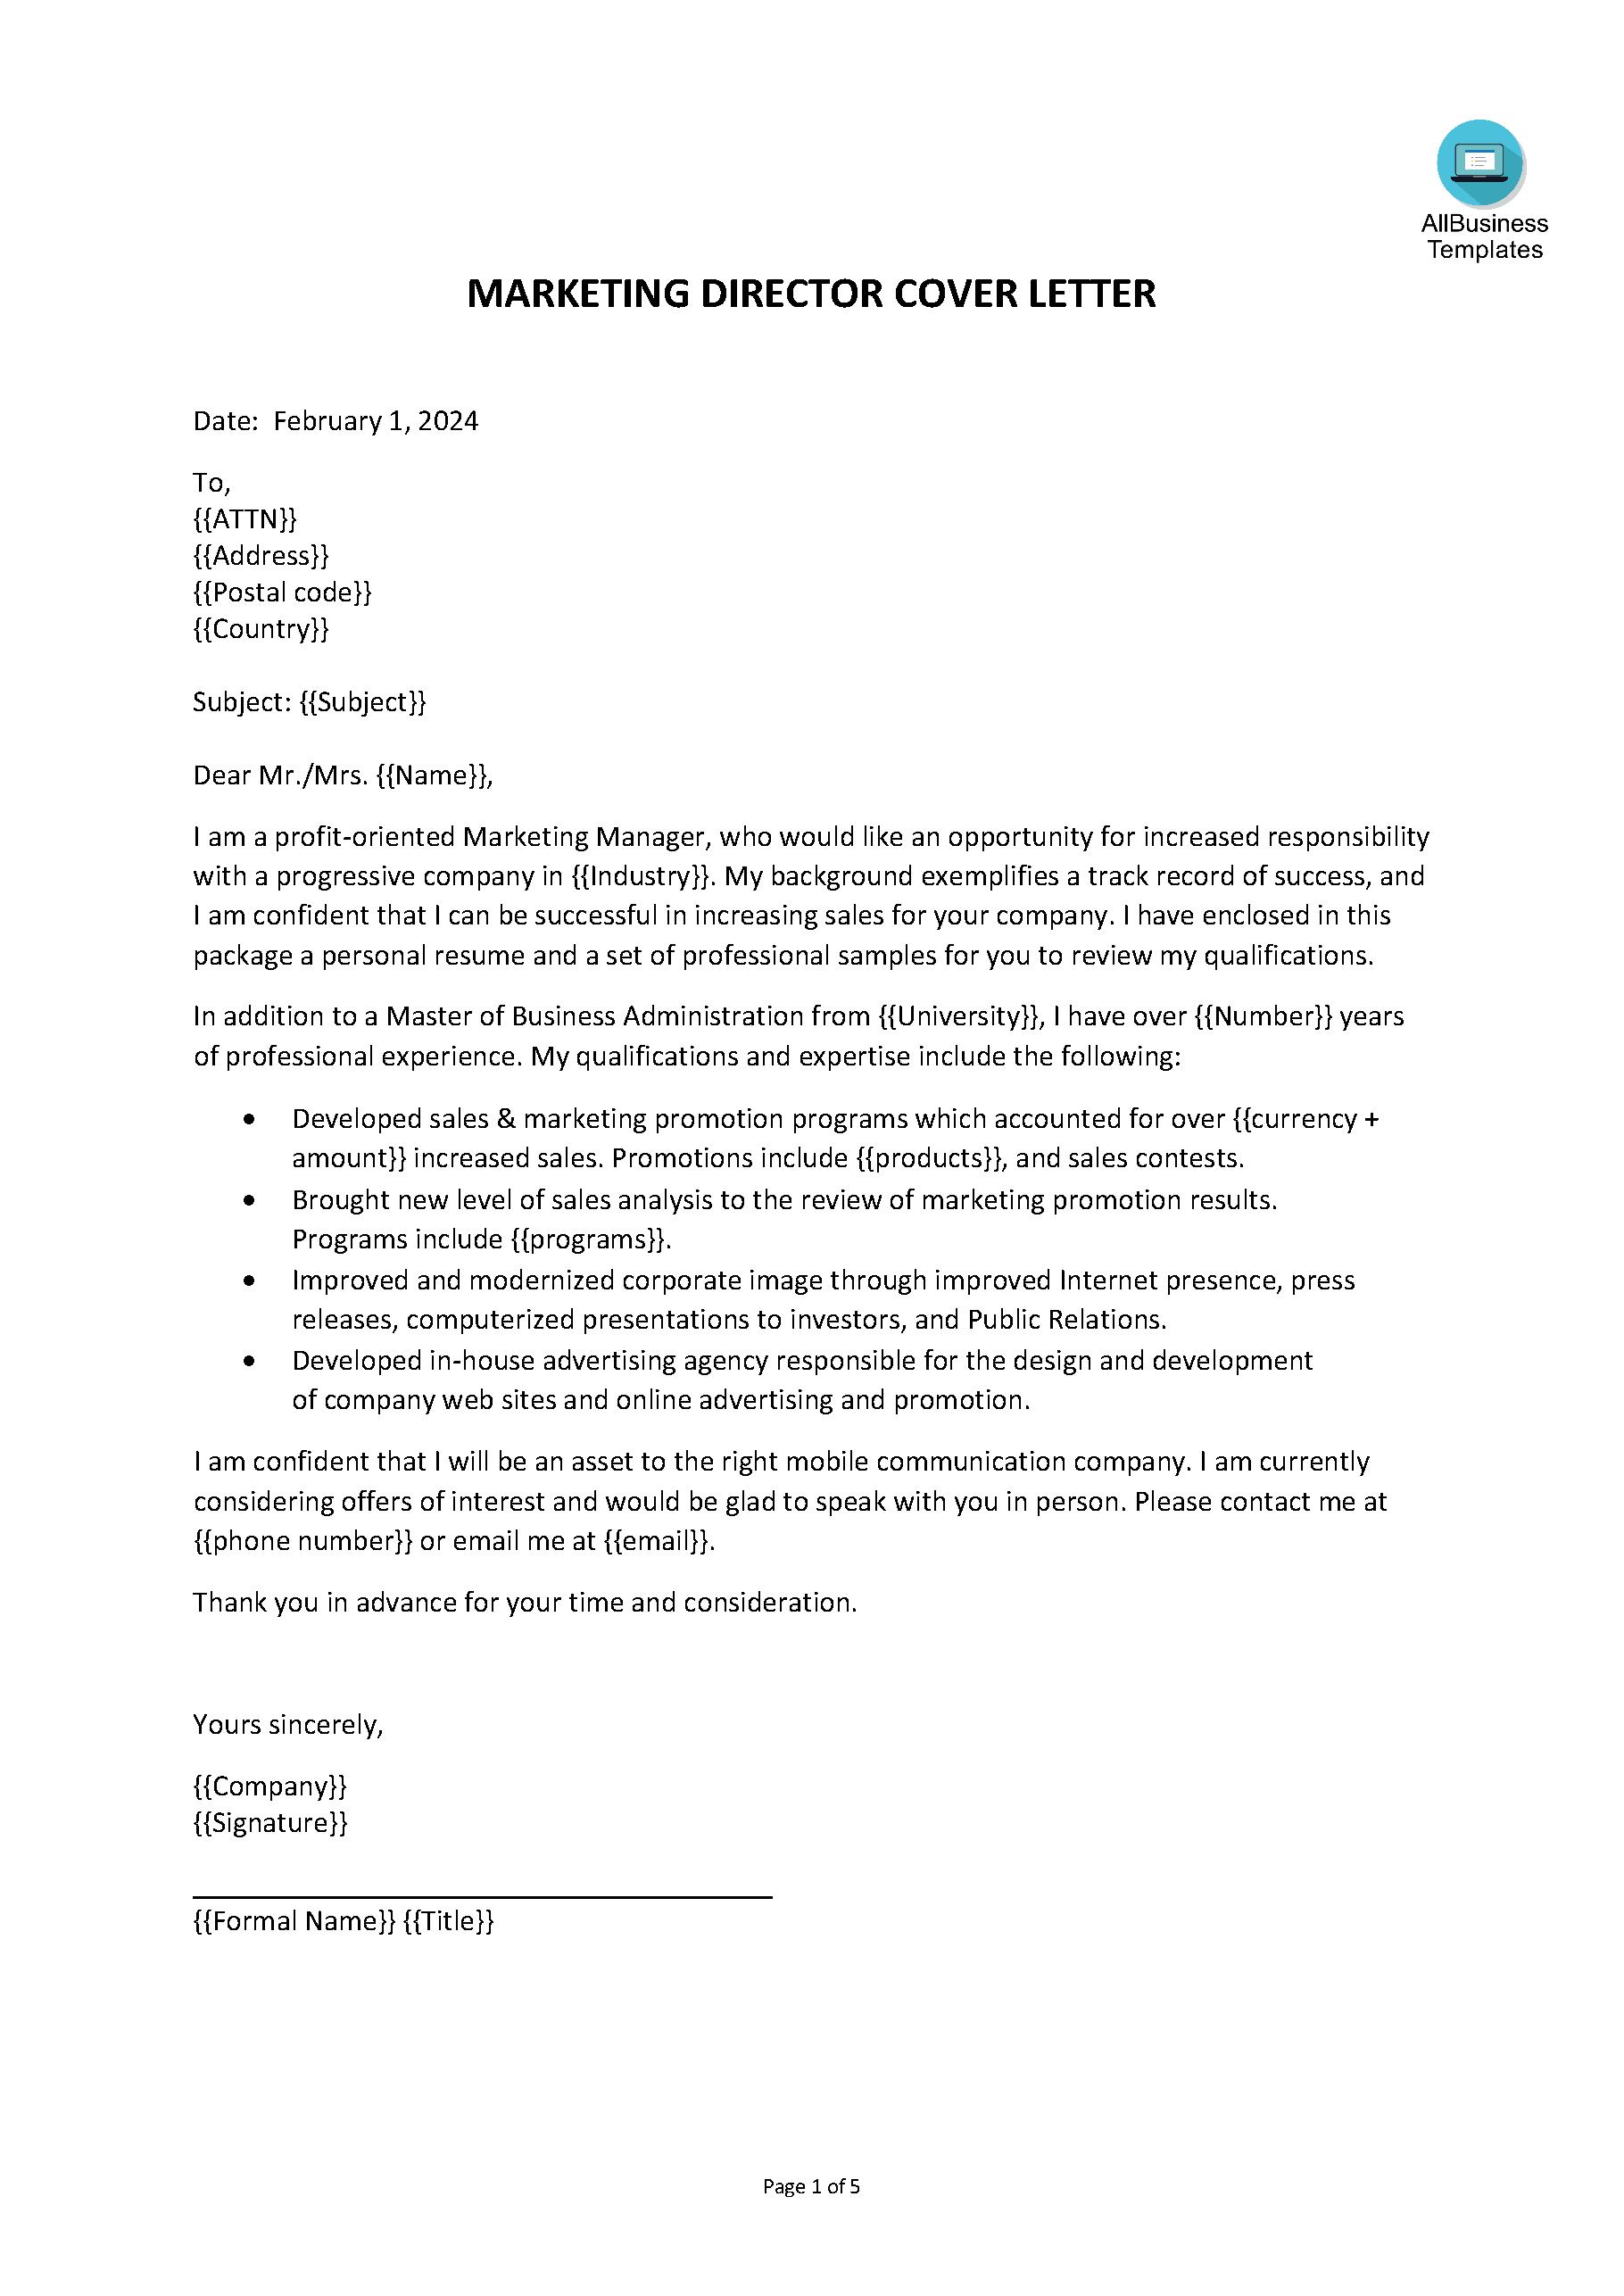 Marketing Director Cover letter | Templates at ...